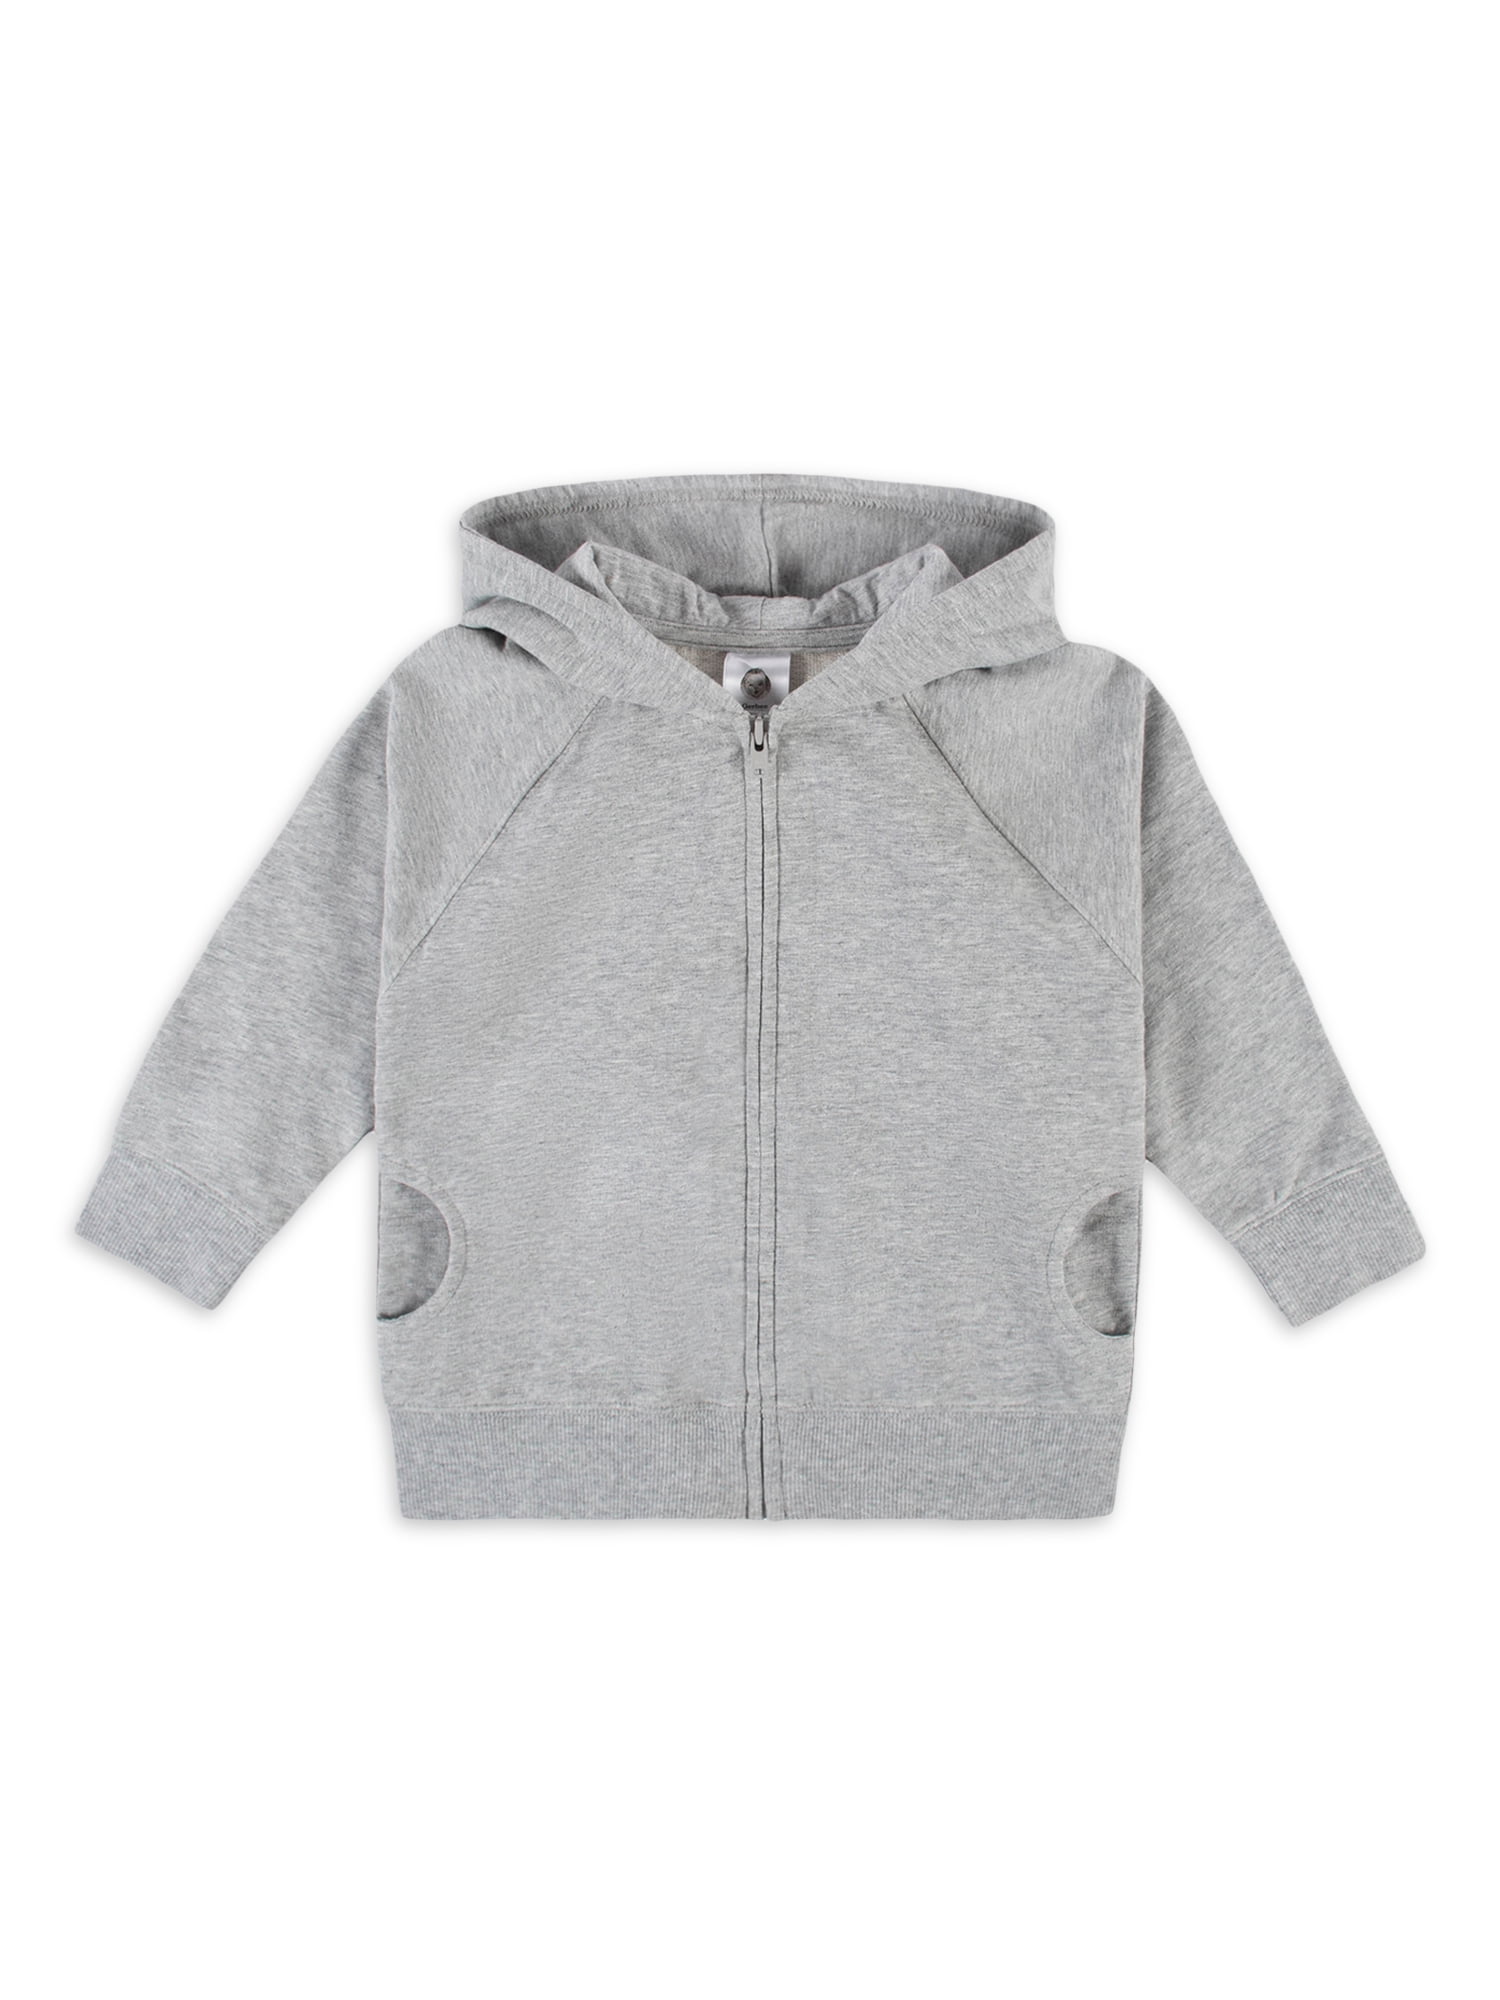 Modern Moments by Gerber Baby and Toddler Boy Zip-Up French Terry ...